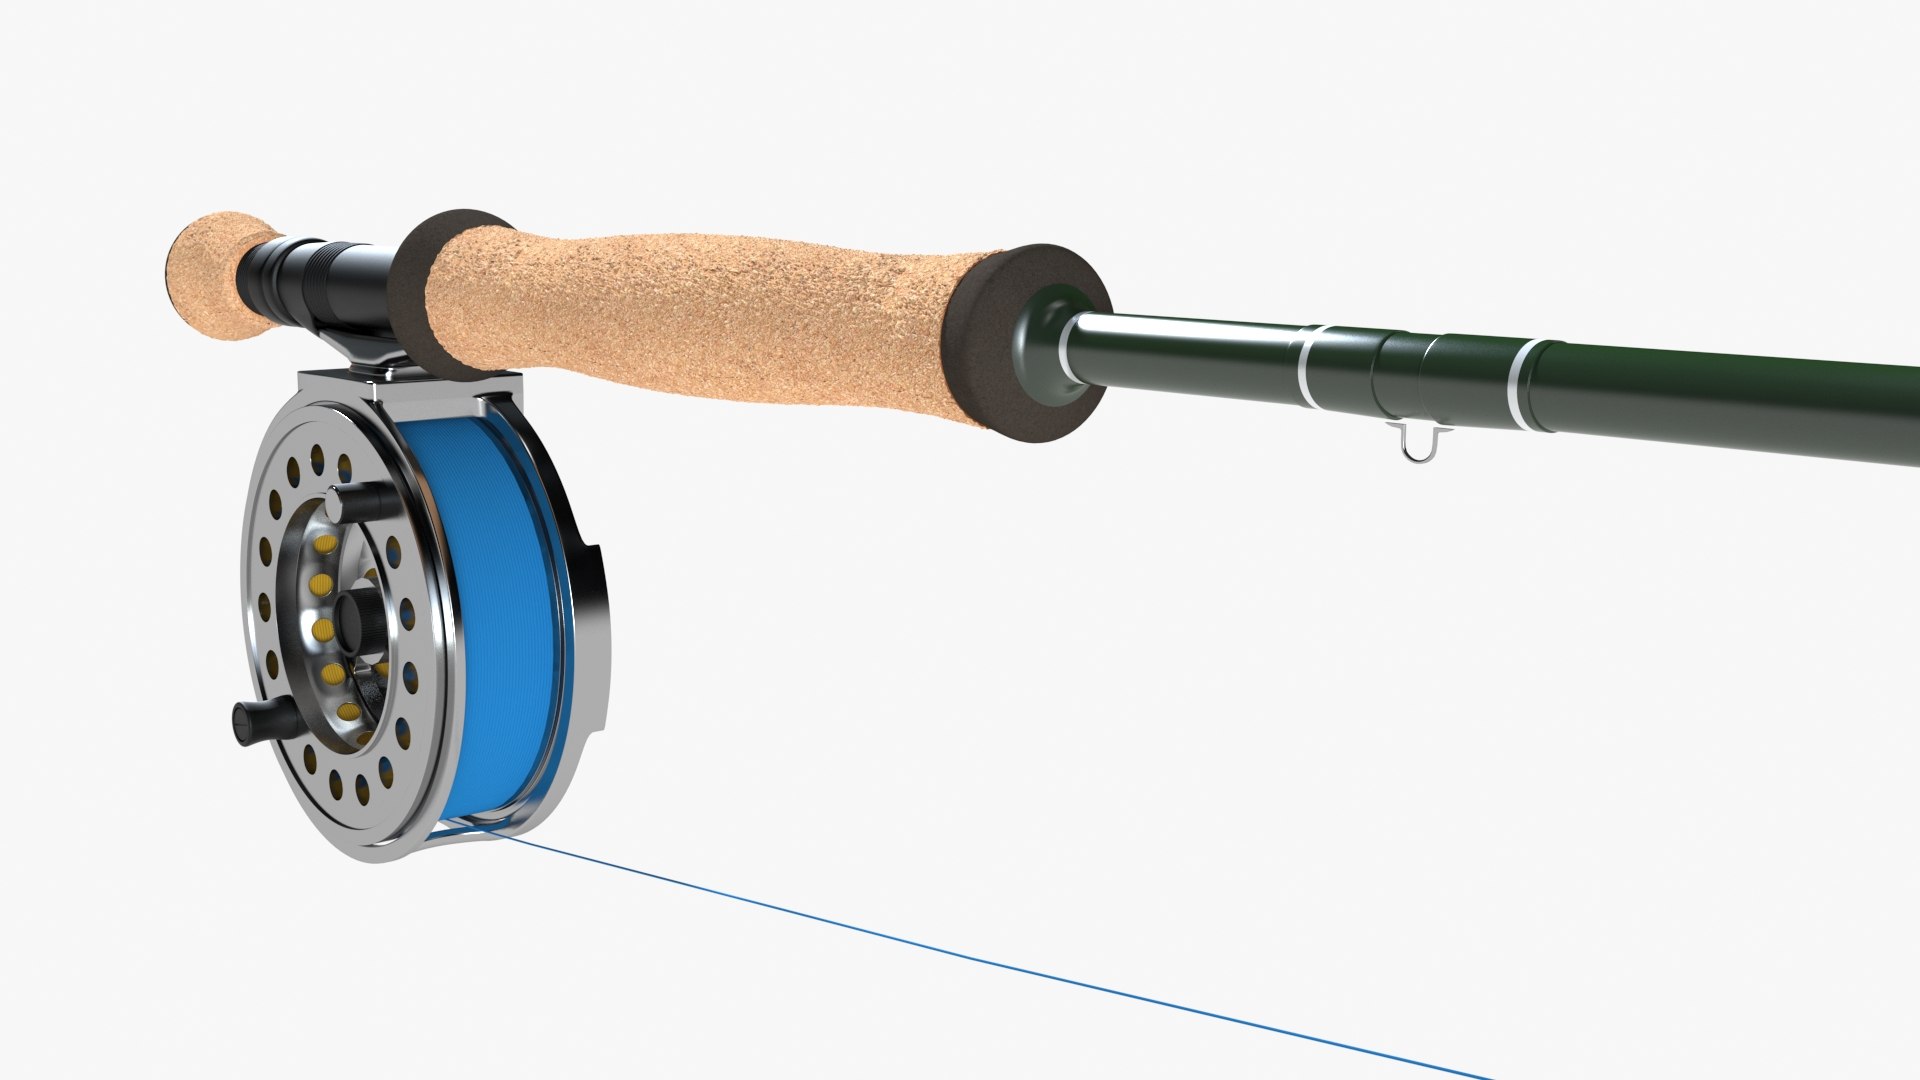 Fly Rod And Reel Model - TurboSquid 1784423